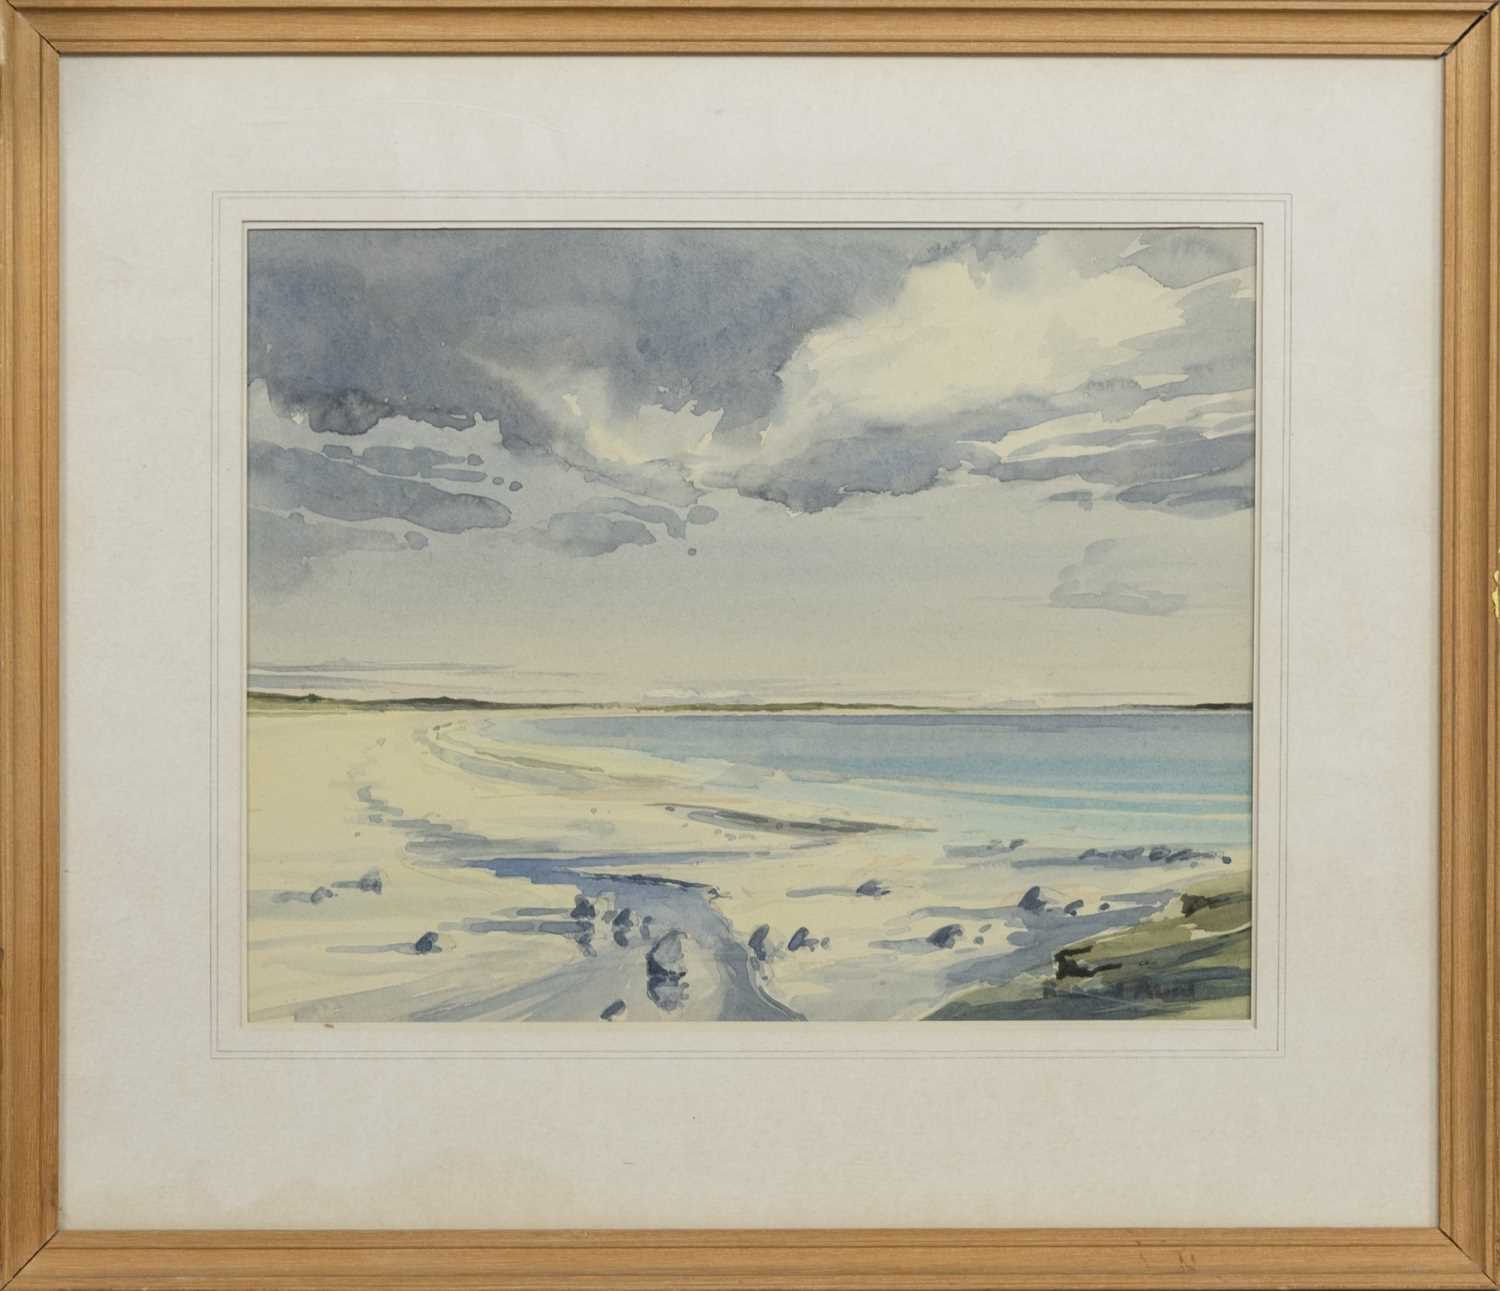 Lot 27 - EAST COAST, TIREE, A WATERCOLOUR BY RICHARD ALRED